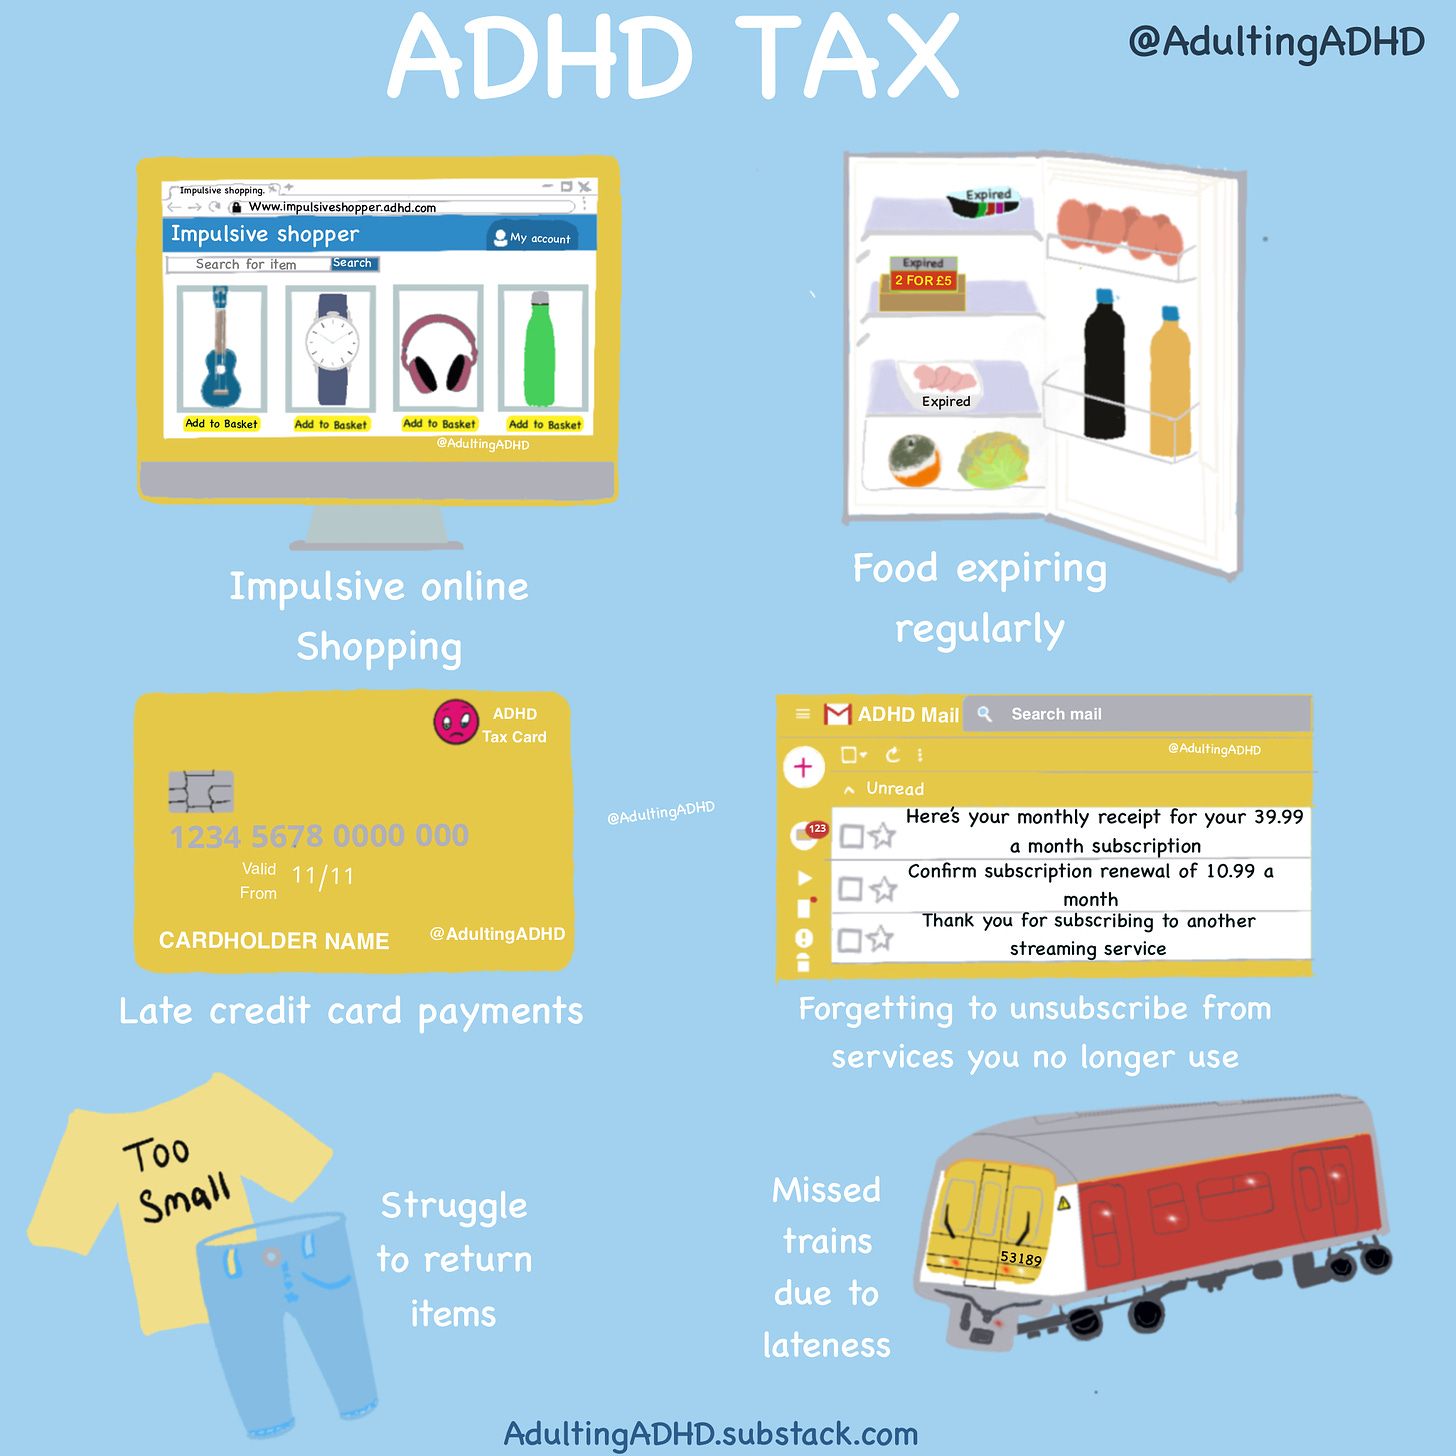 Image titled ADHD Tax with 6 images. The first image: An online store titled 'impulsive shopper' with images of a ukele, a watch, headphones and a water bottle. The second image is a fridge with expired food and rotten lettuce and orange. The third image is of a credit card. The forth image is an email page with three emails on paid subscriptions. The fifth image is a T-shirt and a pair of jeans, the fourth image is a red/grey train